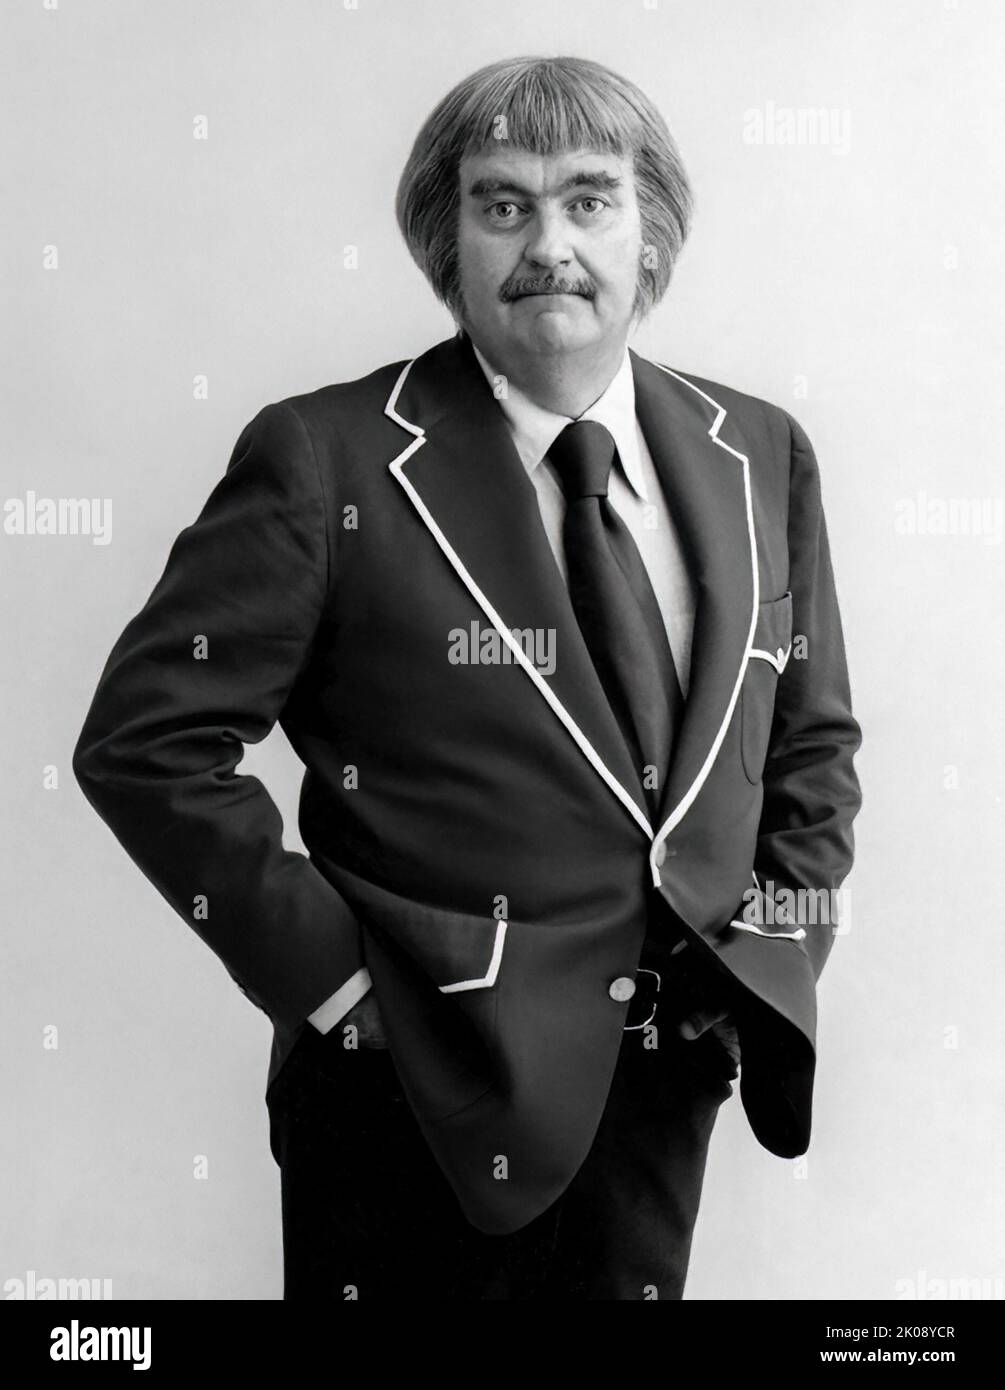 Bob Keeshan in character as Captain Kangaroo from the popular Captain Kangaroo children's program which aired from 1955 until 1984. Photo: 1977. (USA) Stock Photo